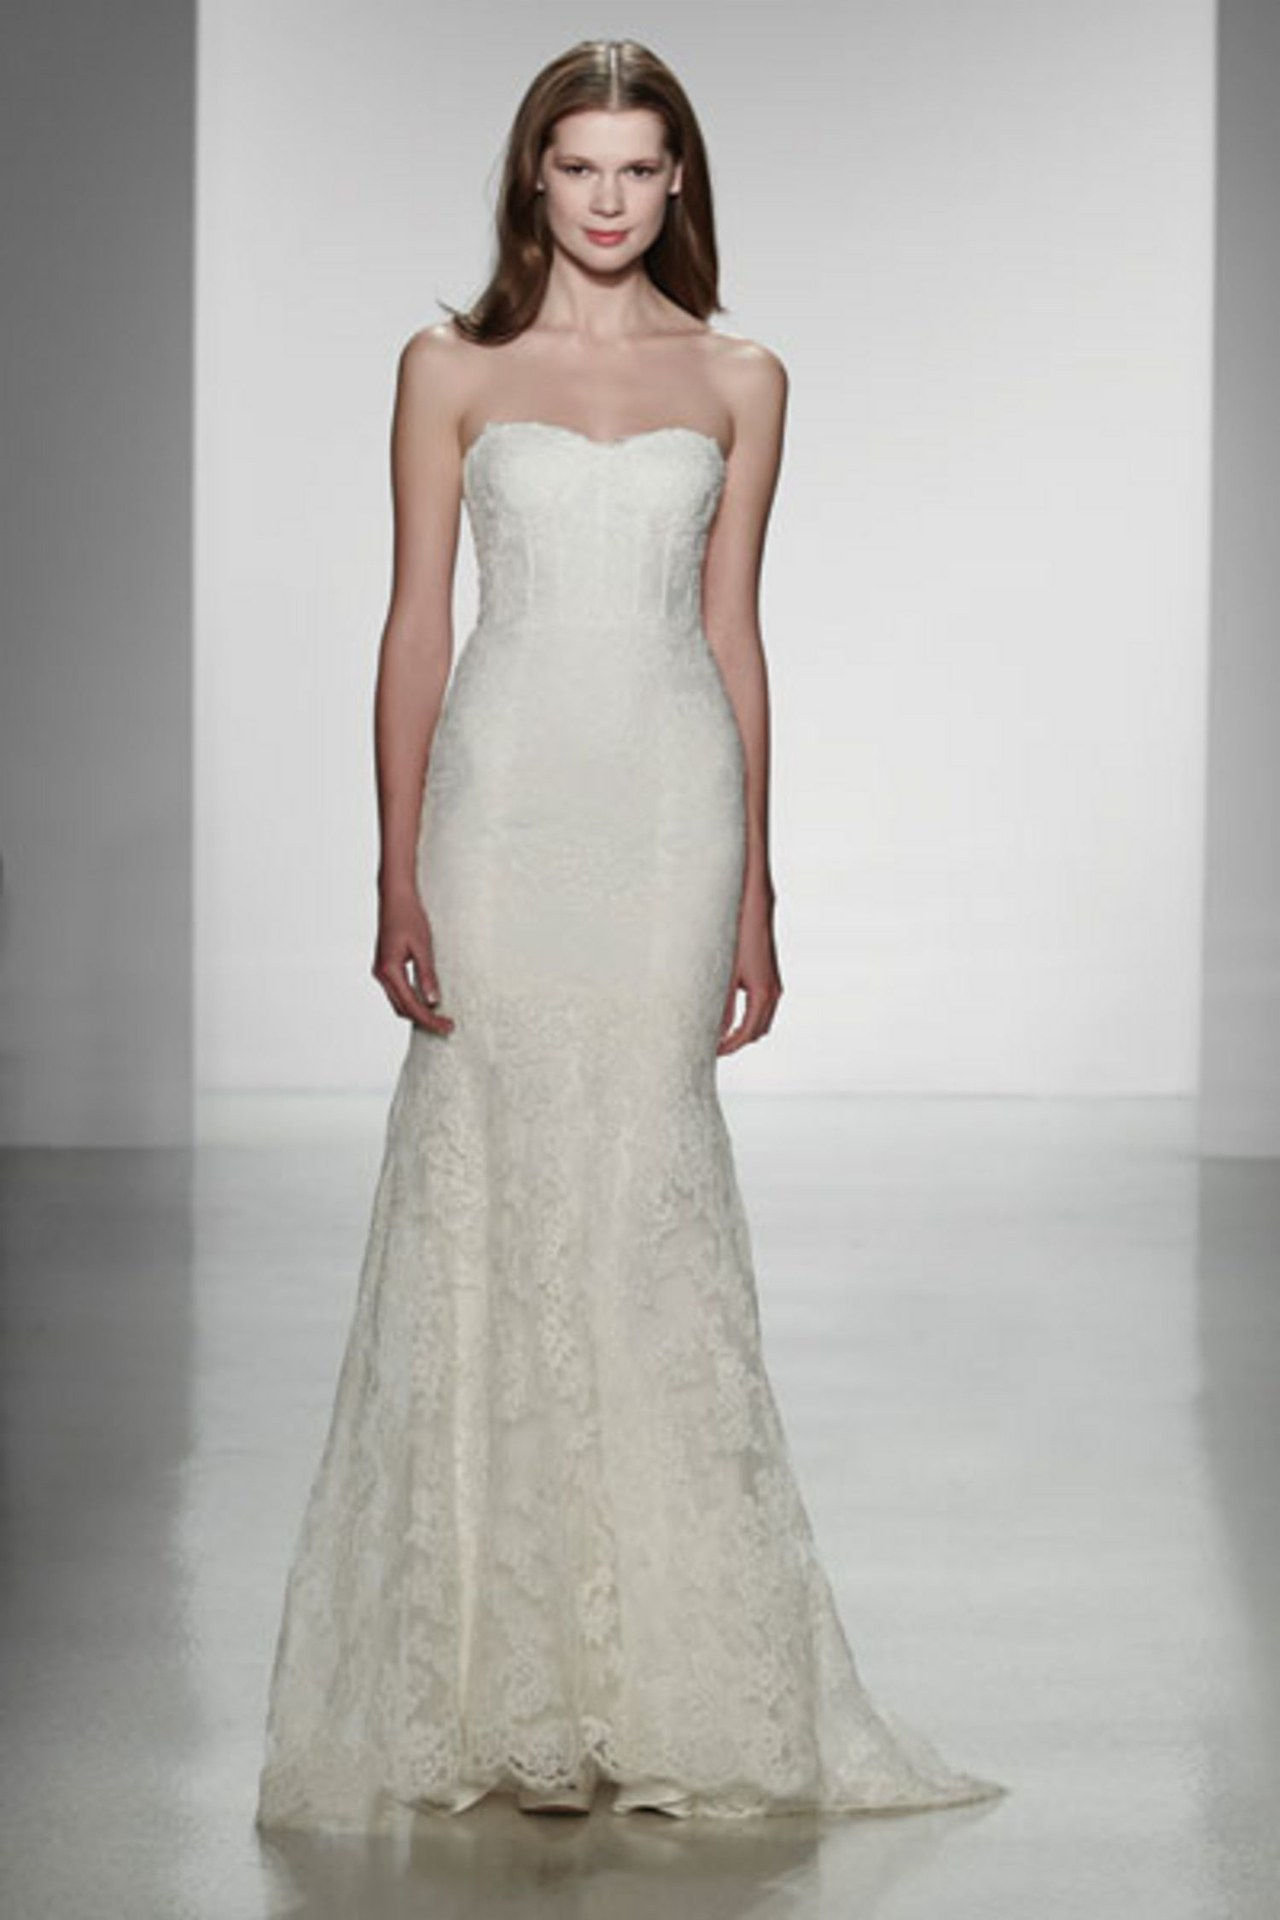 5 wedding dresses for outdoor brides anna kendrick the last five years wedding gown 0709